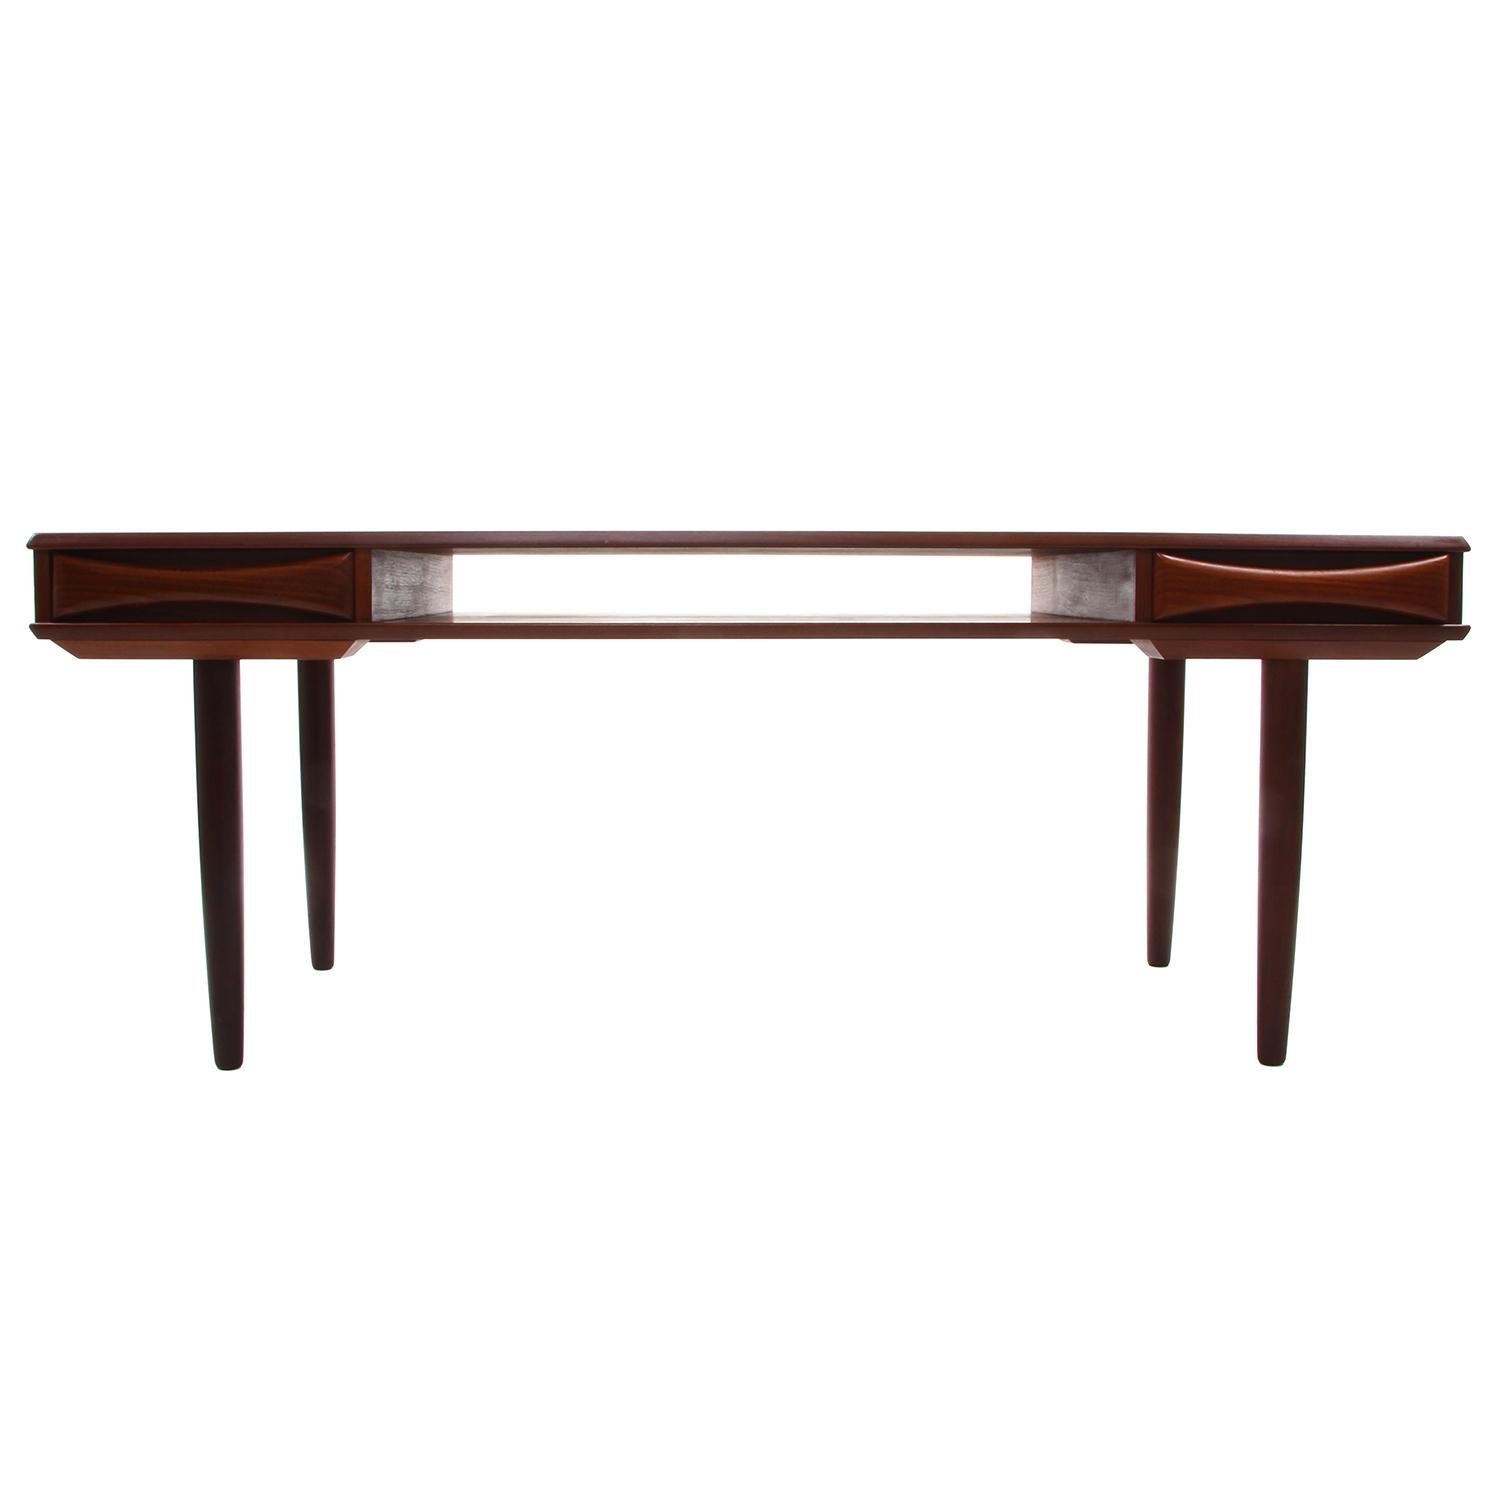 Teak coffee table by Danish furniture maker in the 1960s, beautiful Scandinavian Modern teak coffee table with shelf and two drawers, in very good vintage condition.

A gorgeous midcentury piece, crafted in teak, rich in color and proudly showing